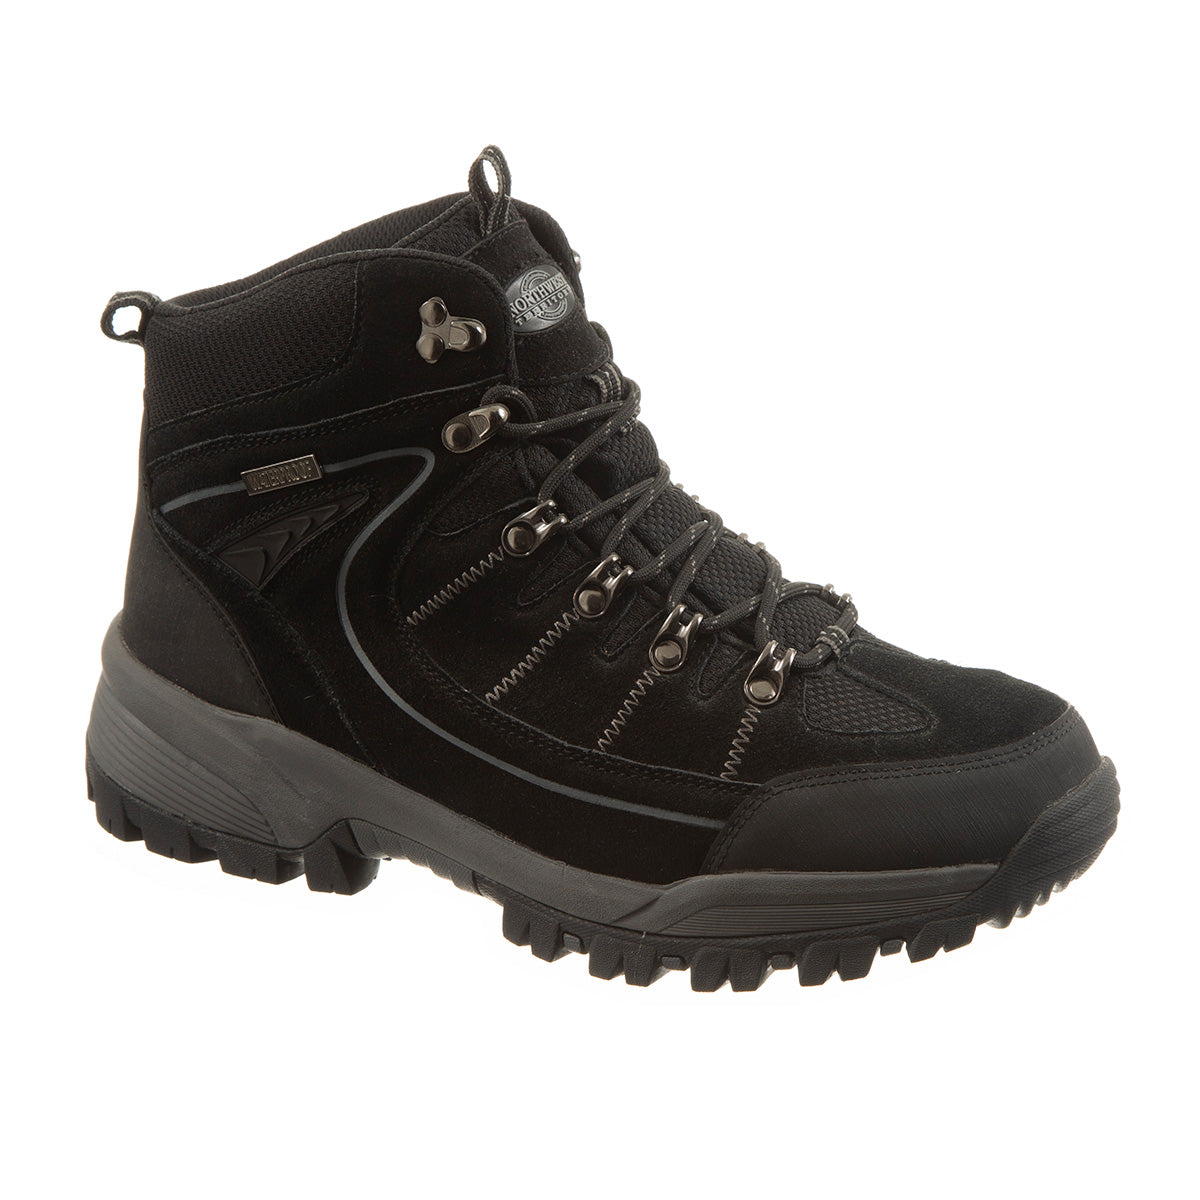 Rae Leather Waterproof Walking And Hiking Boots